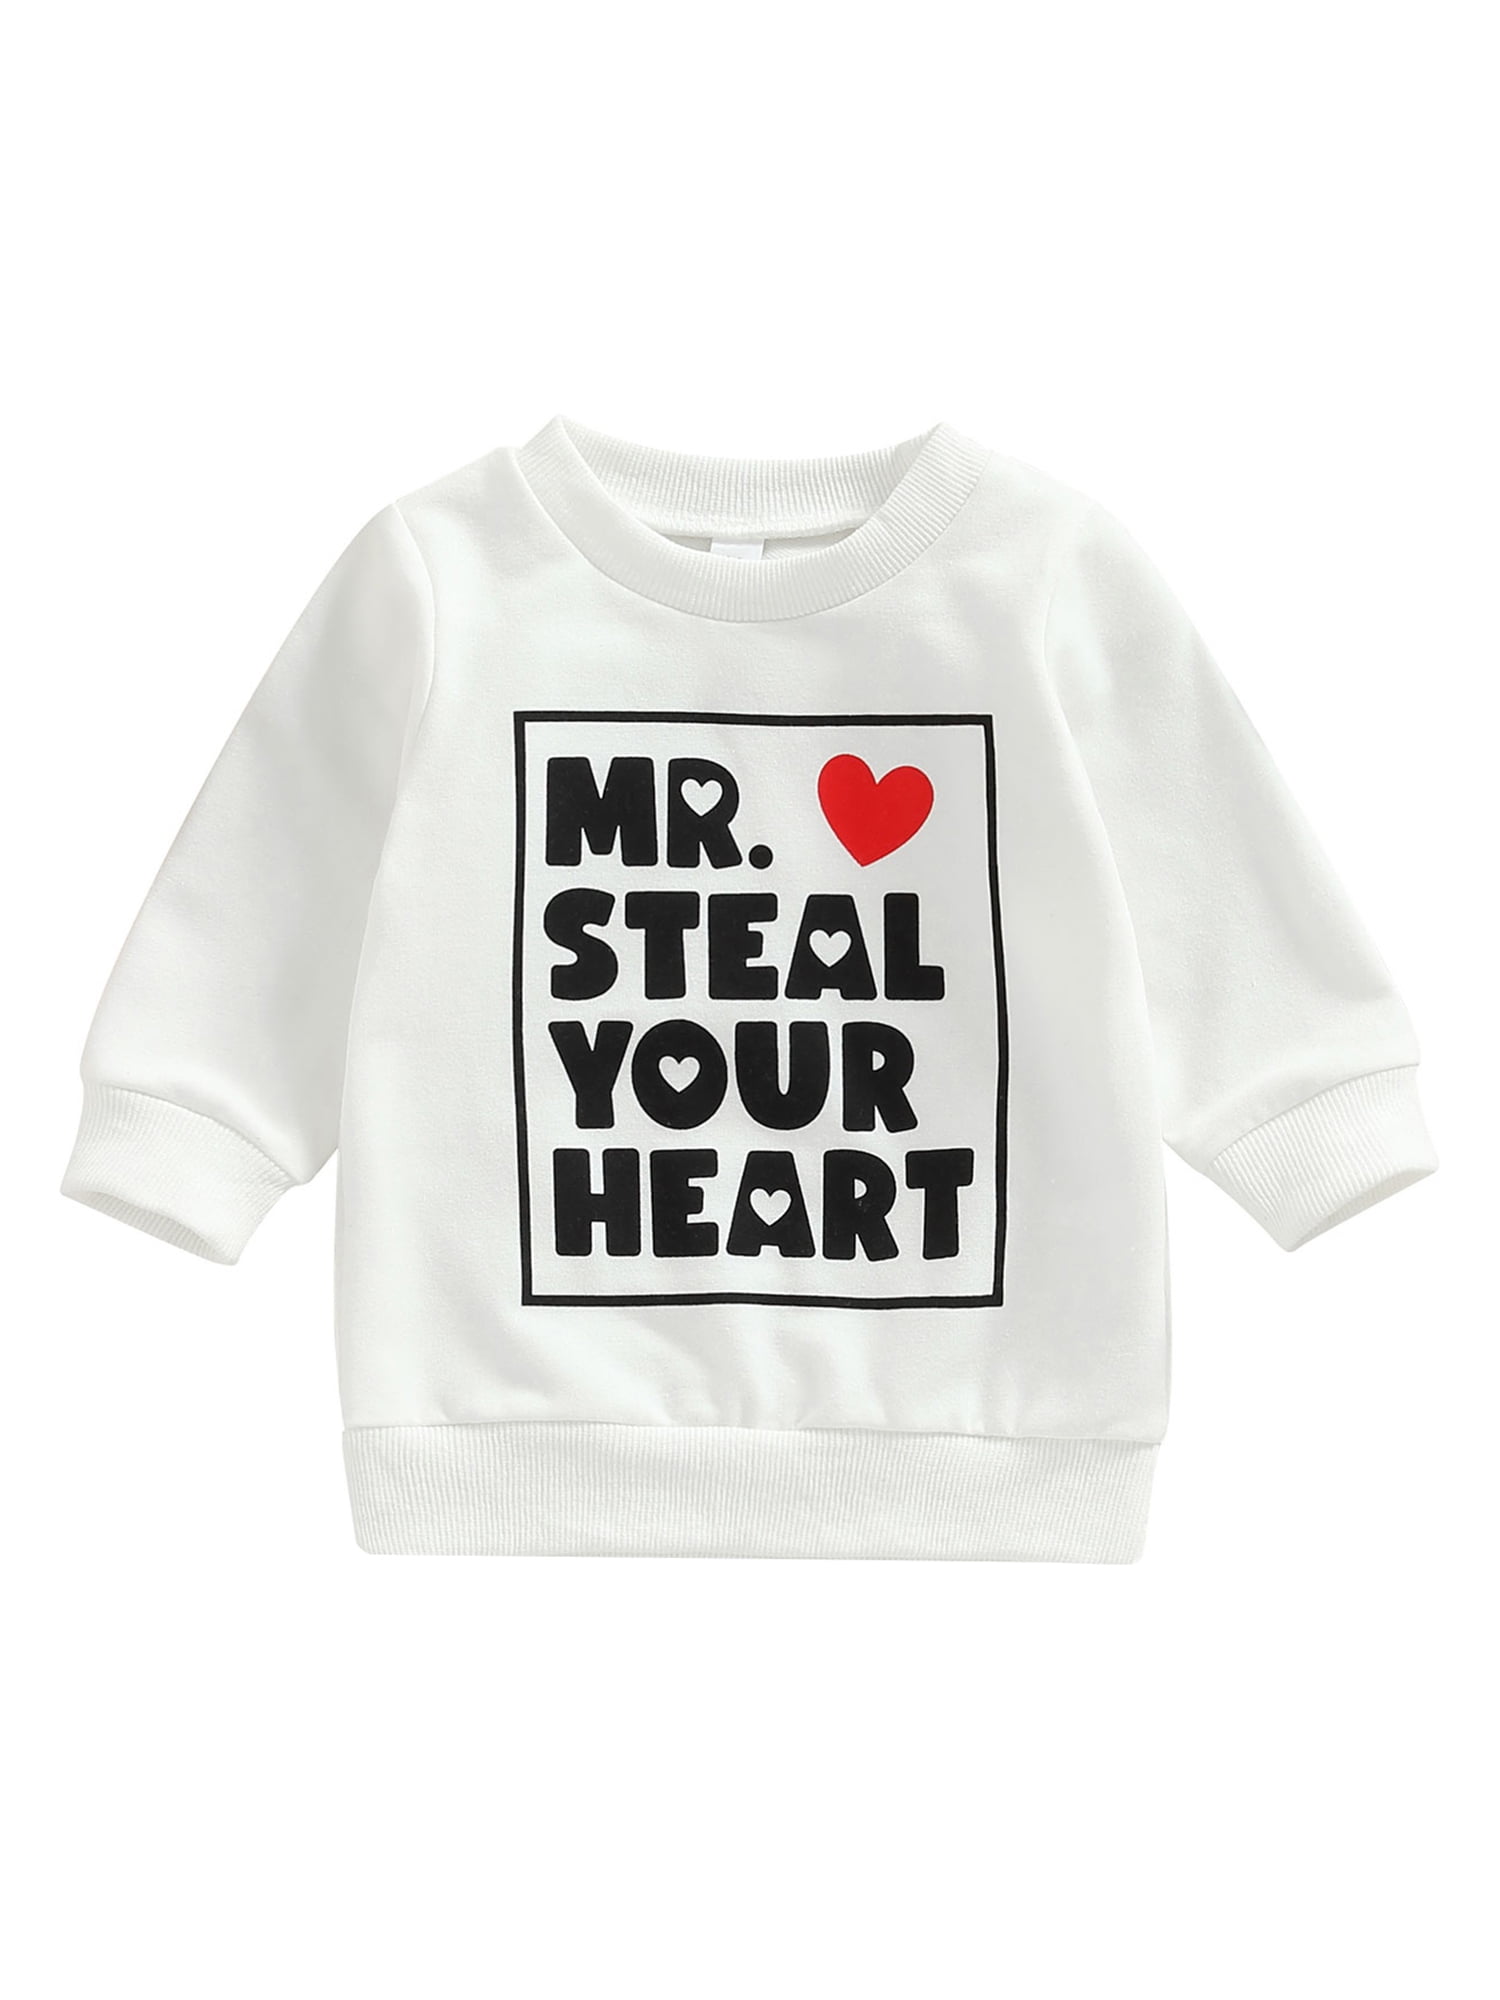 Aunavey Toddler Baby Boys Girls Valentine\'s Day Sweatshirt MR. Steal Your  Heart Pullover Spring Clothes Top